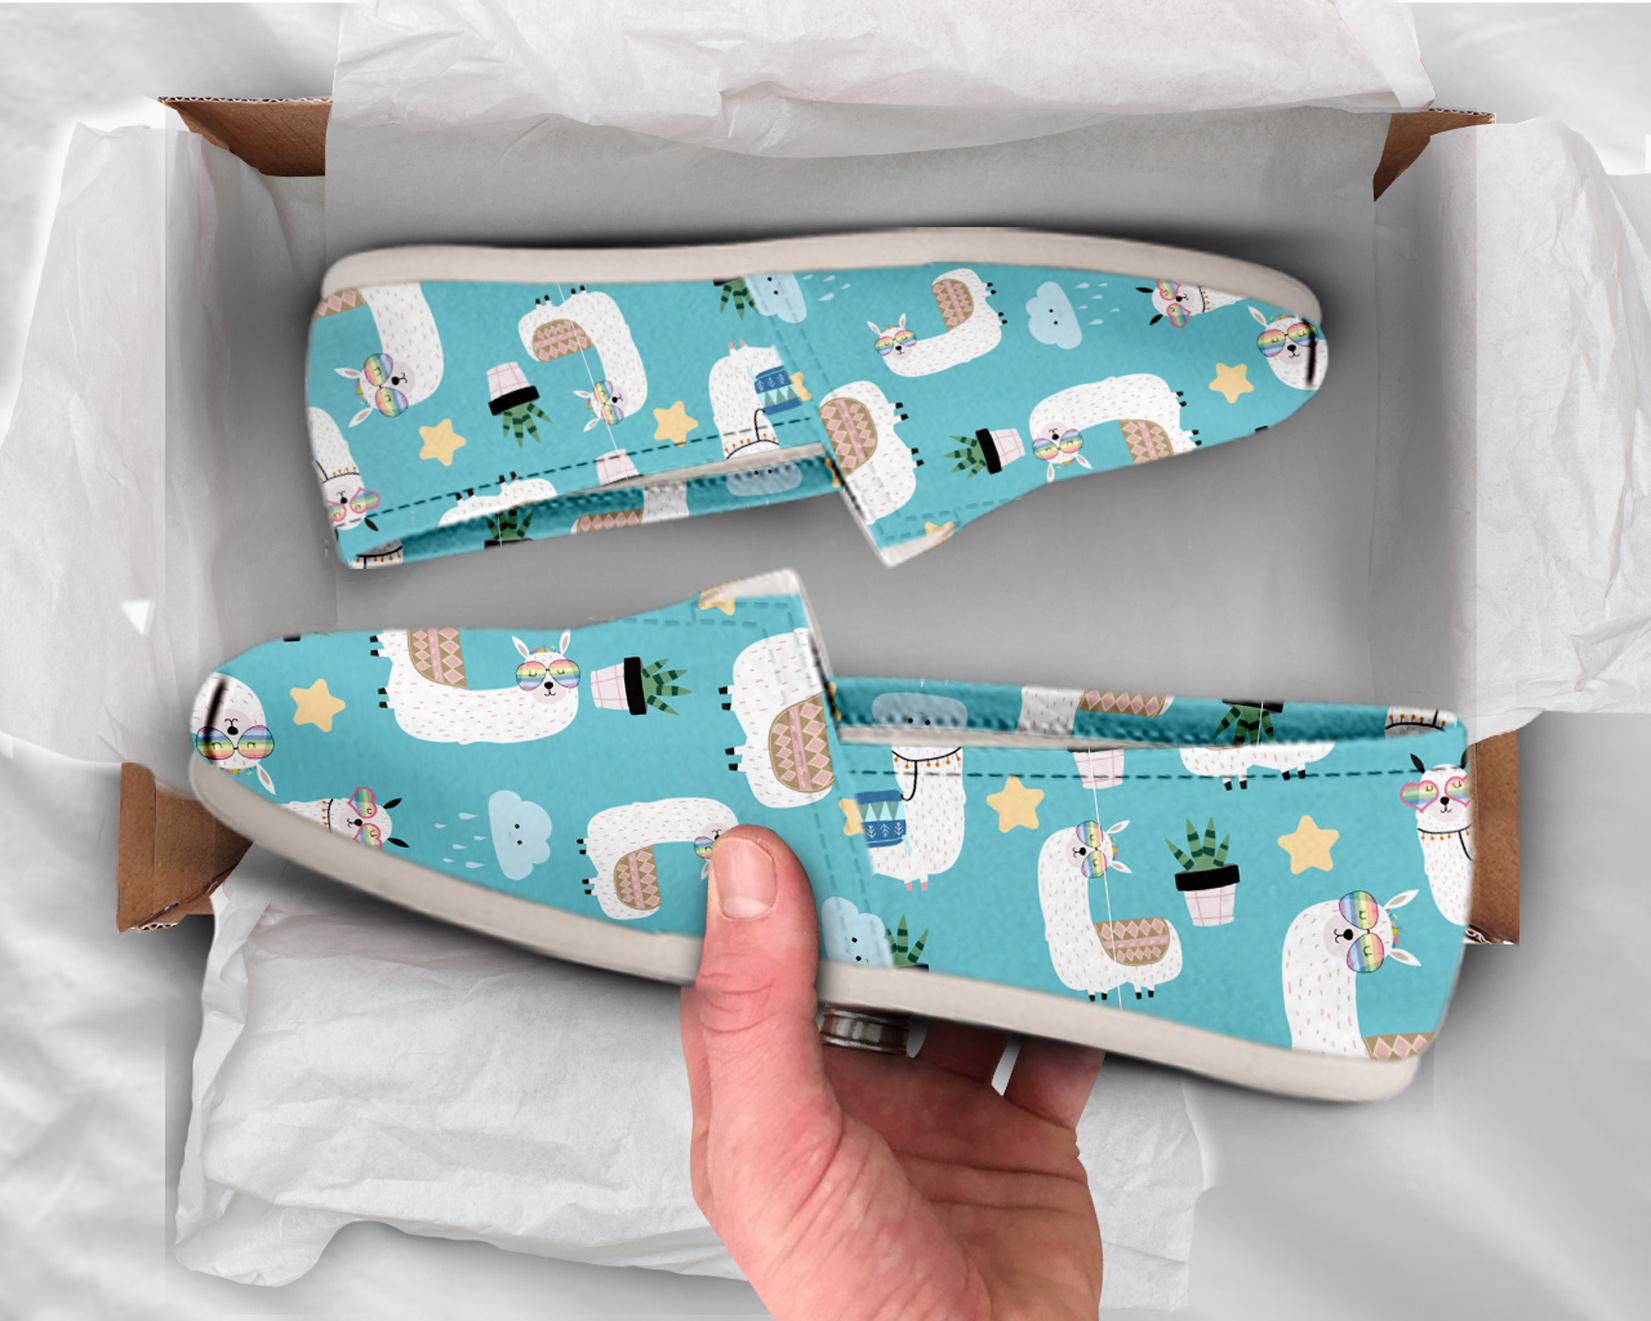 Slip-On Llama Shoes | Custom Canvas Sneakers For Kids & Adults